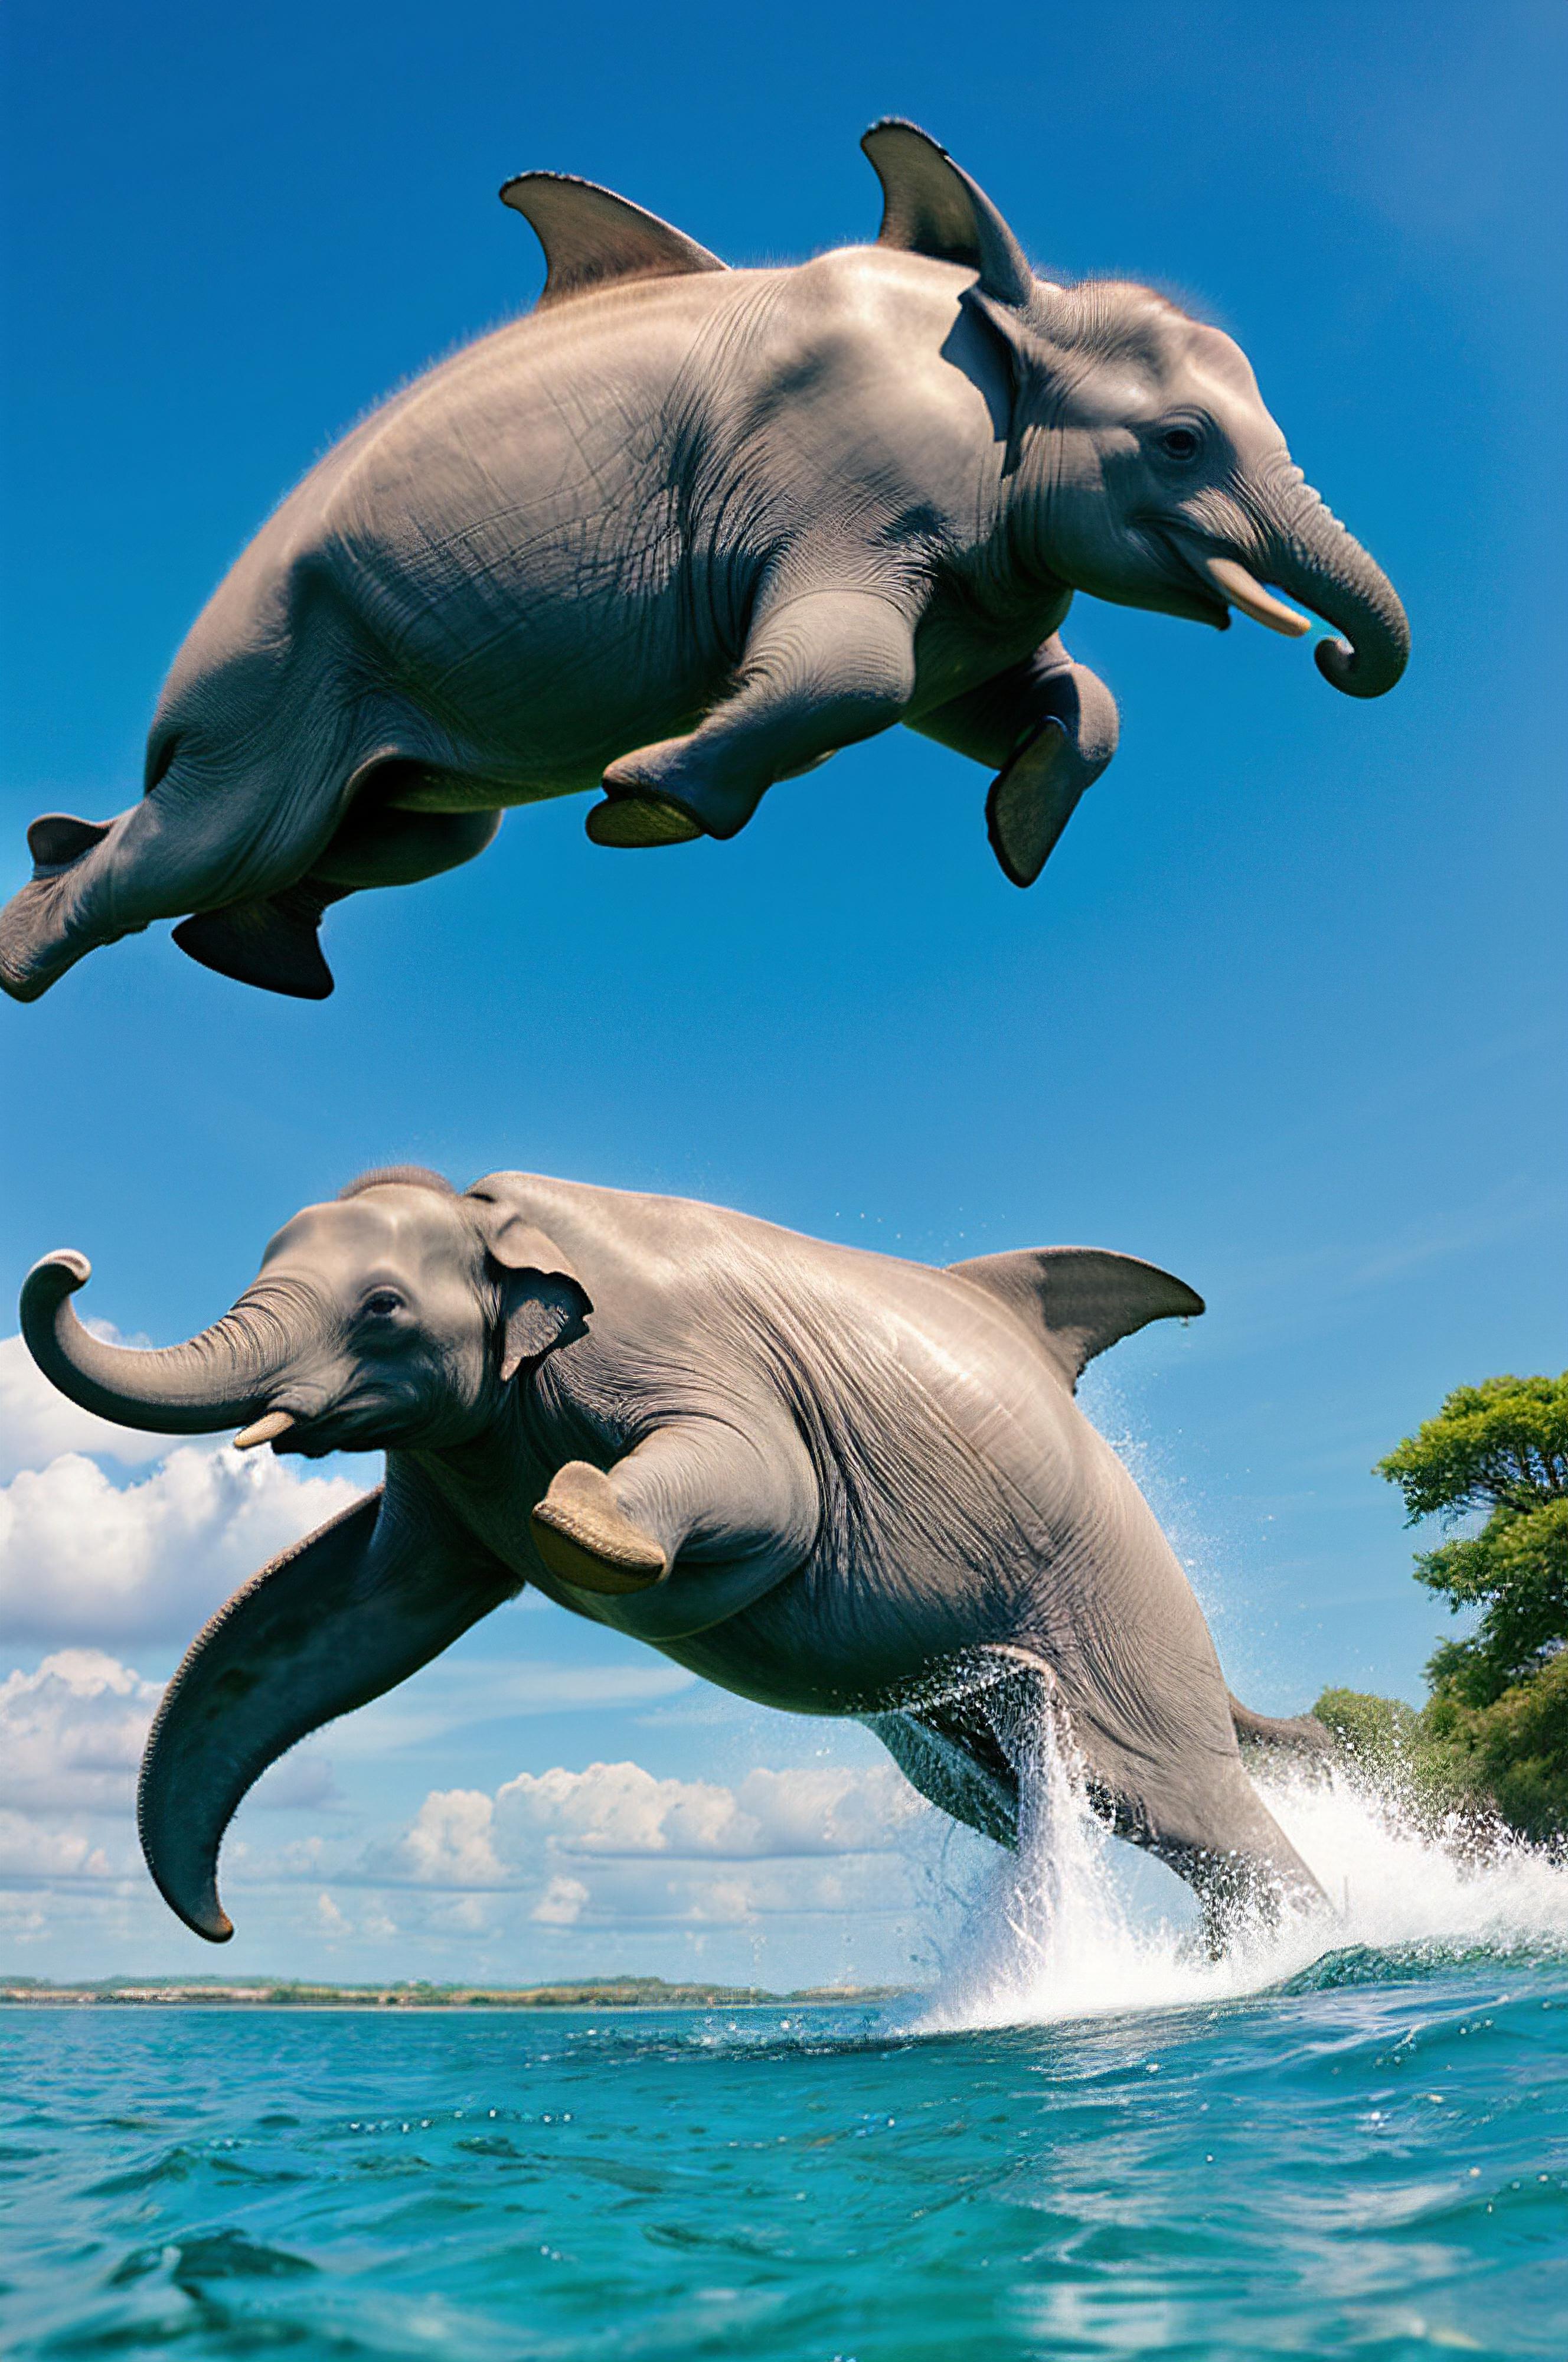 A pair of elephants jumping in the water, one on the left and one on the right.